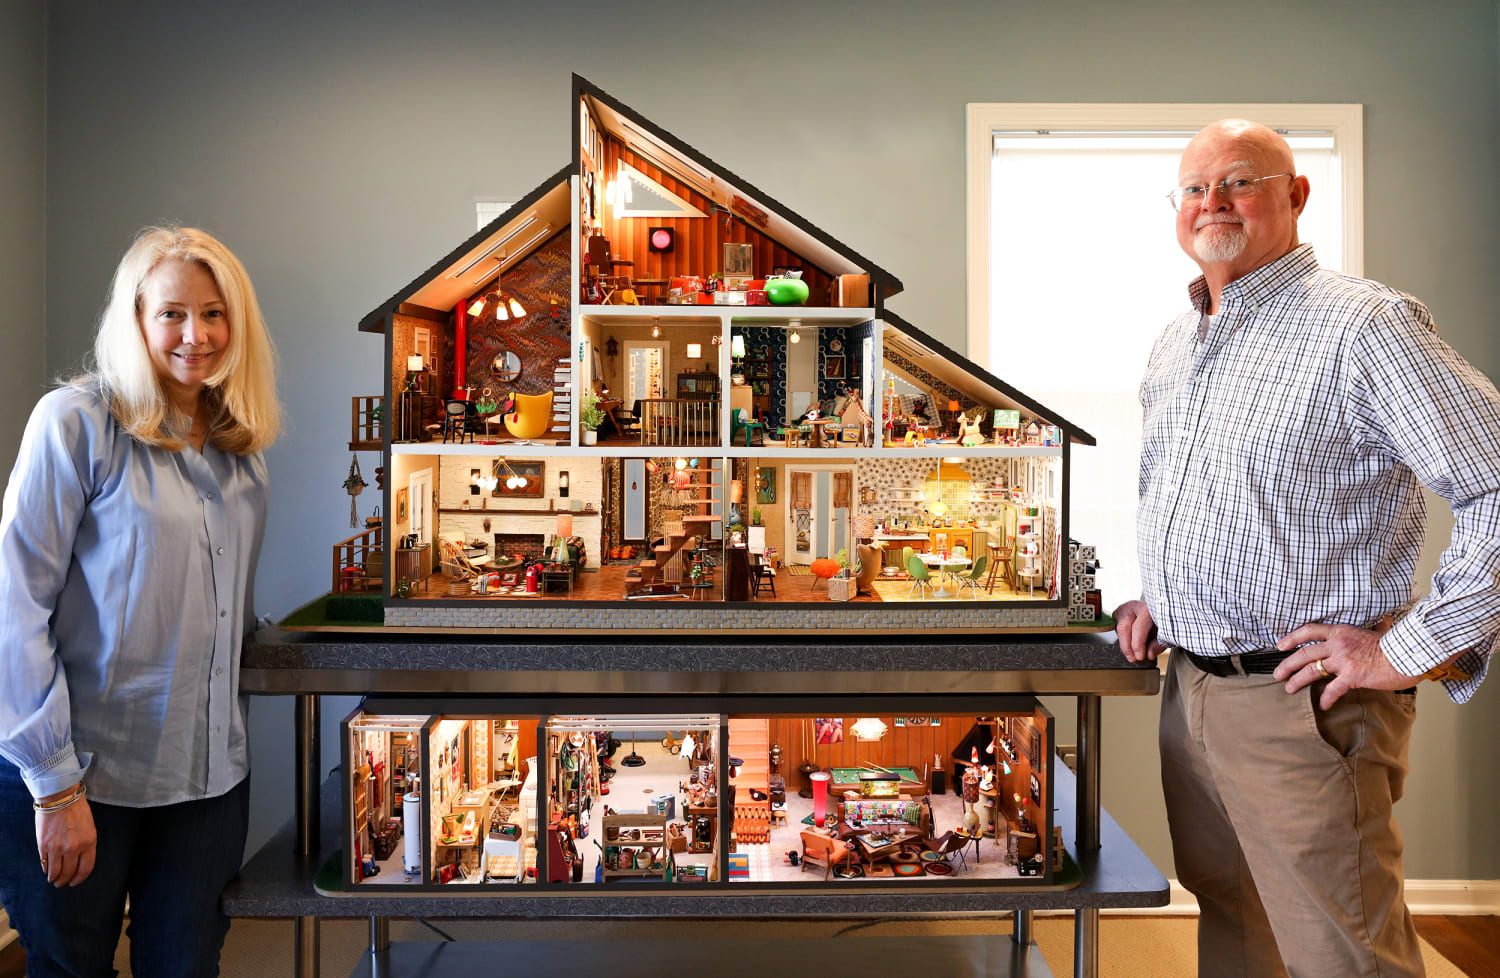 See inside this incredibly realistic miniature house